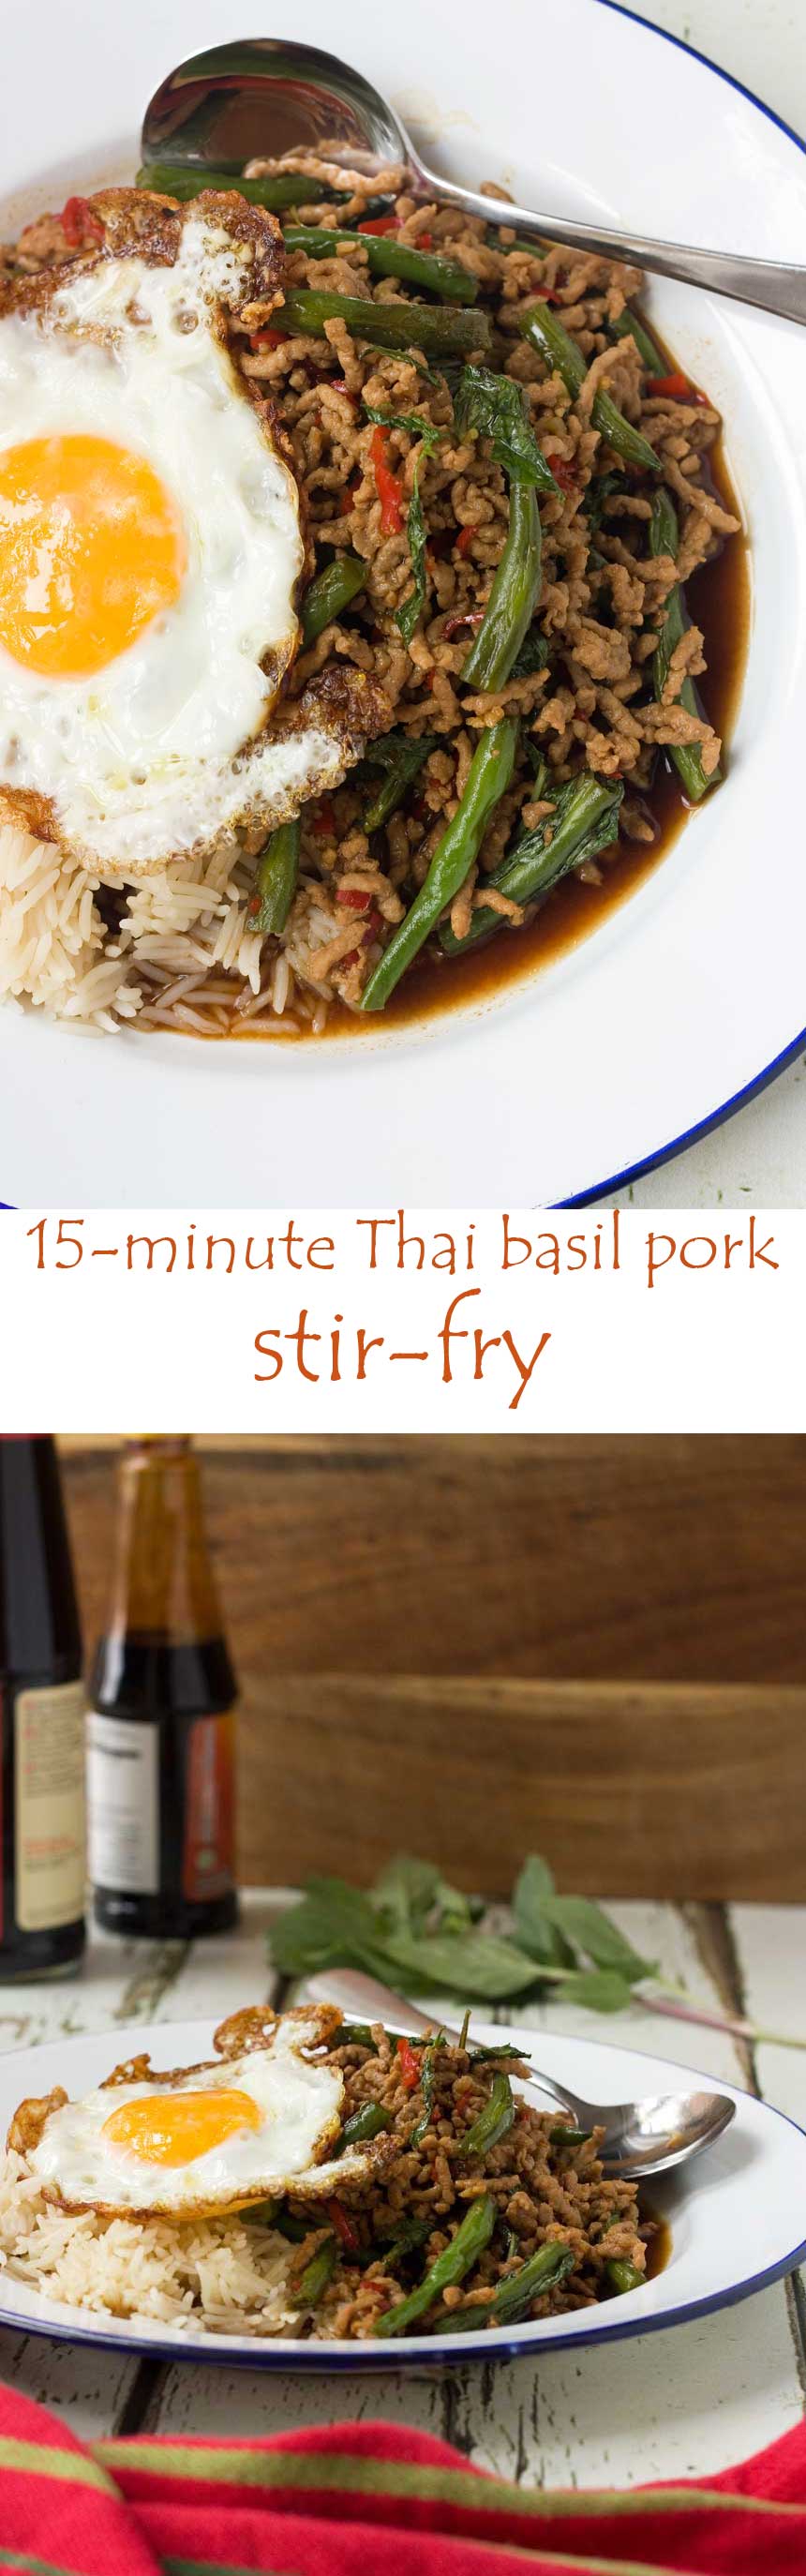 A Thai basil stir-fry just like what you'd find on the streets of Bangkok - and it's ready in just 15 minutes!